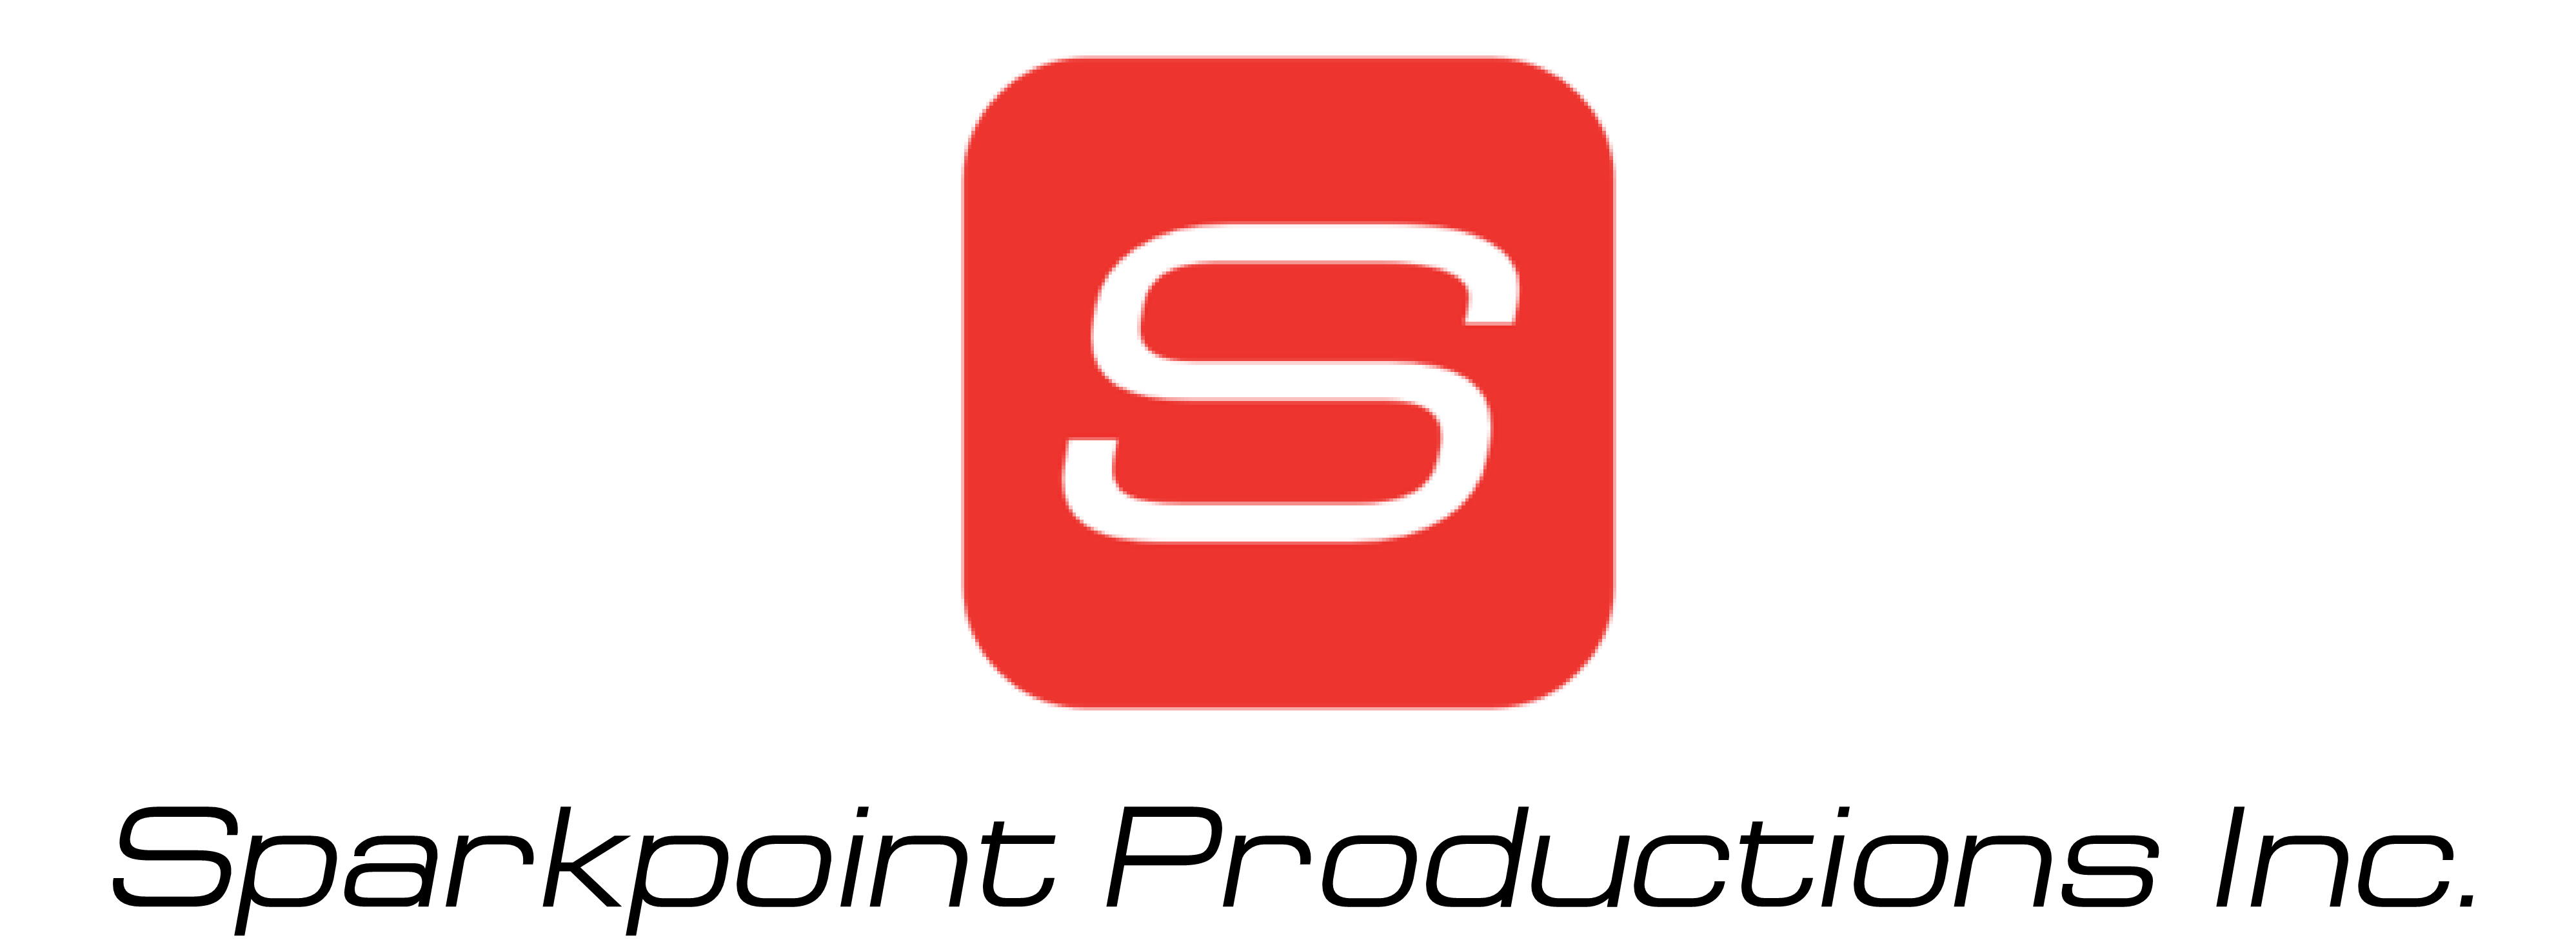 Sparkpoint Productions Inc.